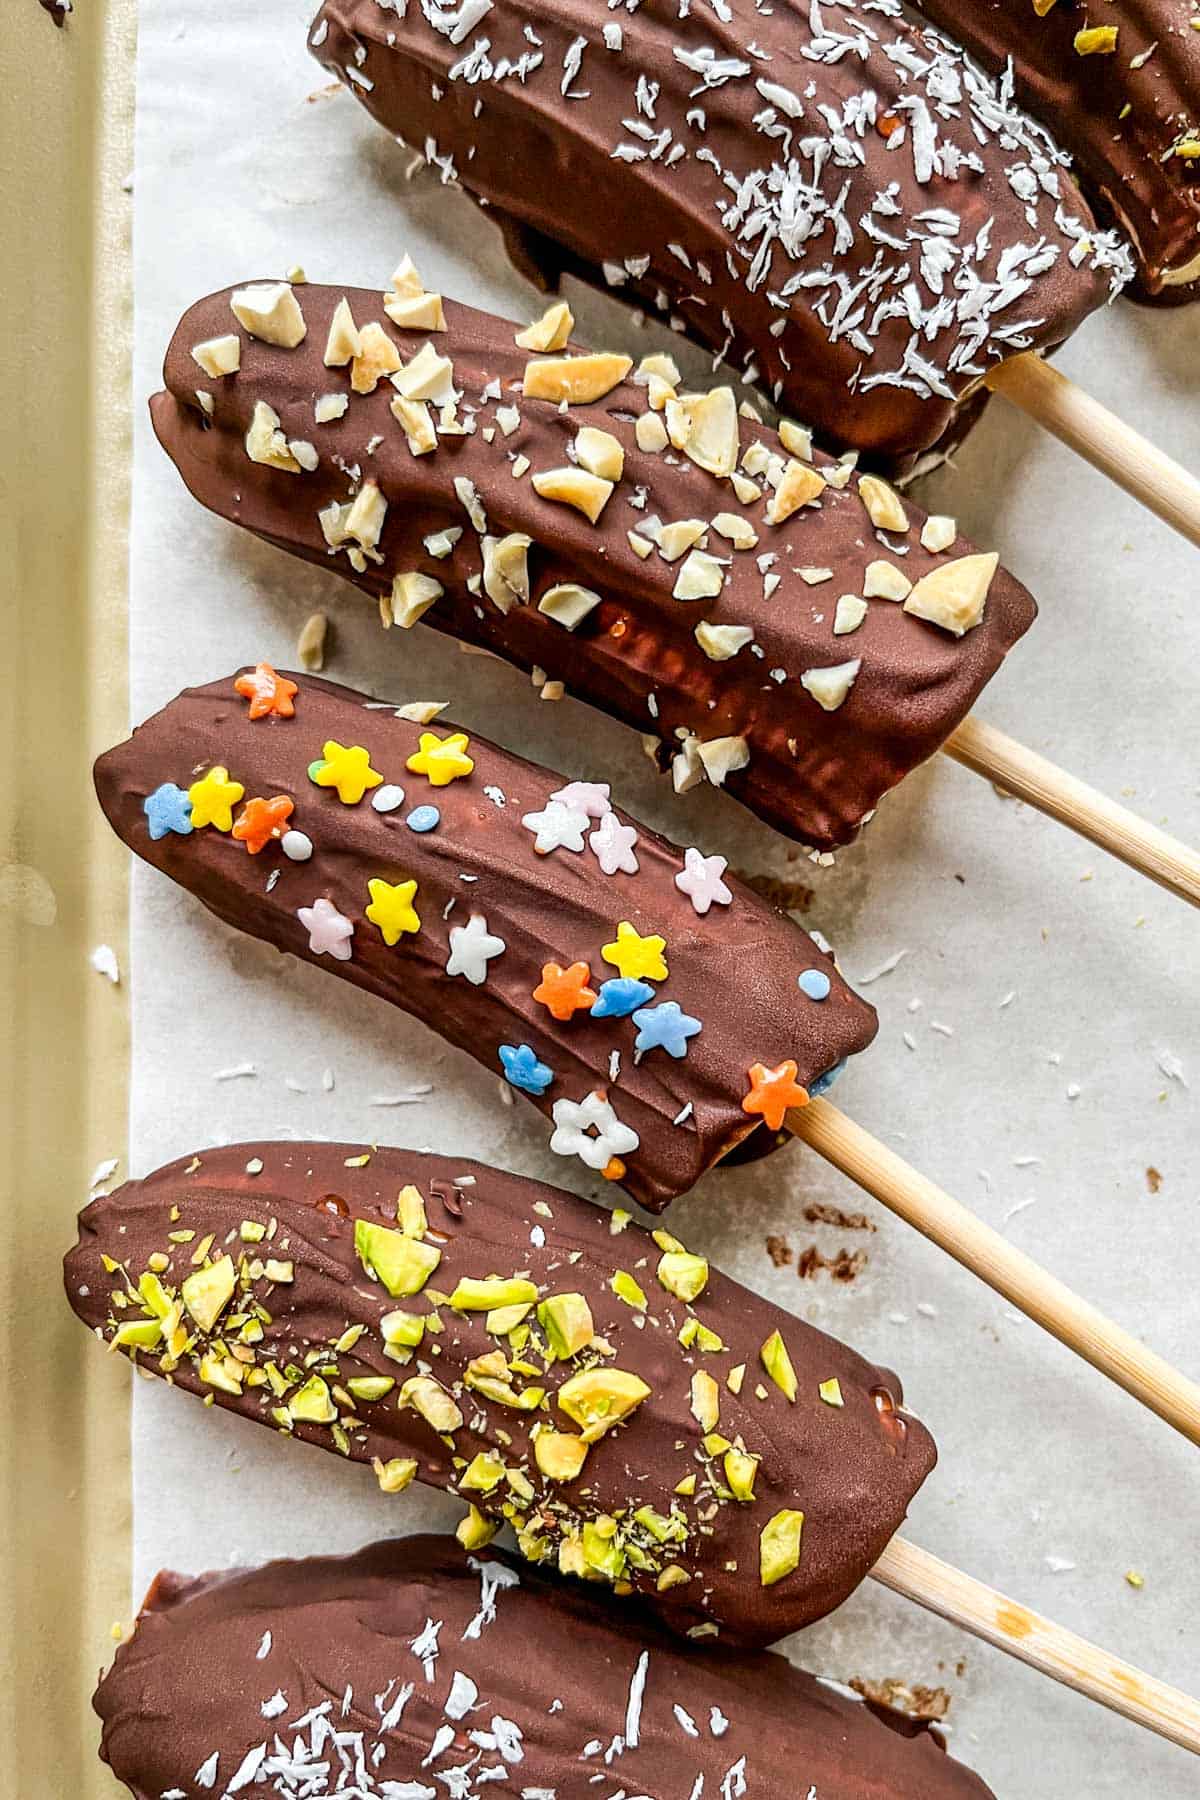 Dark chocolate bananas decorated with sprinkles, chopped nuts, and coconut flakes on a parchment lined baking sheet.